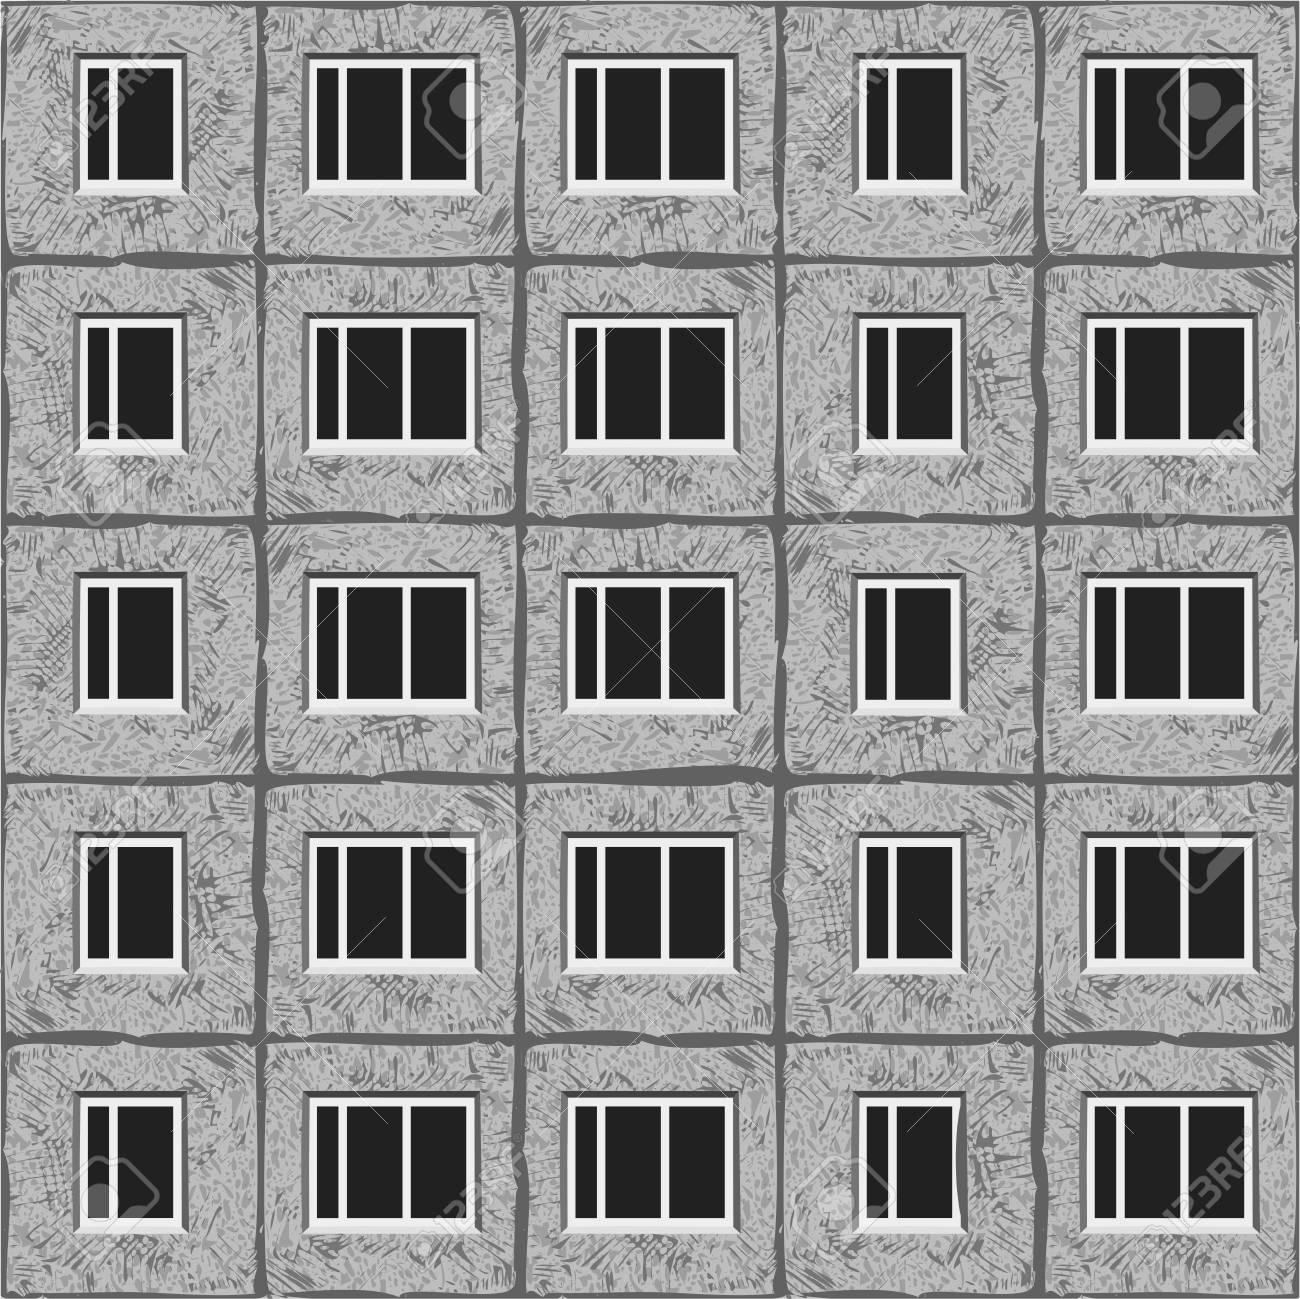 104917113 soviet architecture grey unified panel house pattern texture element